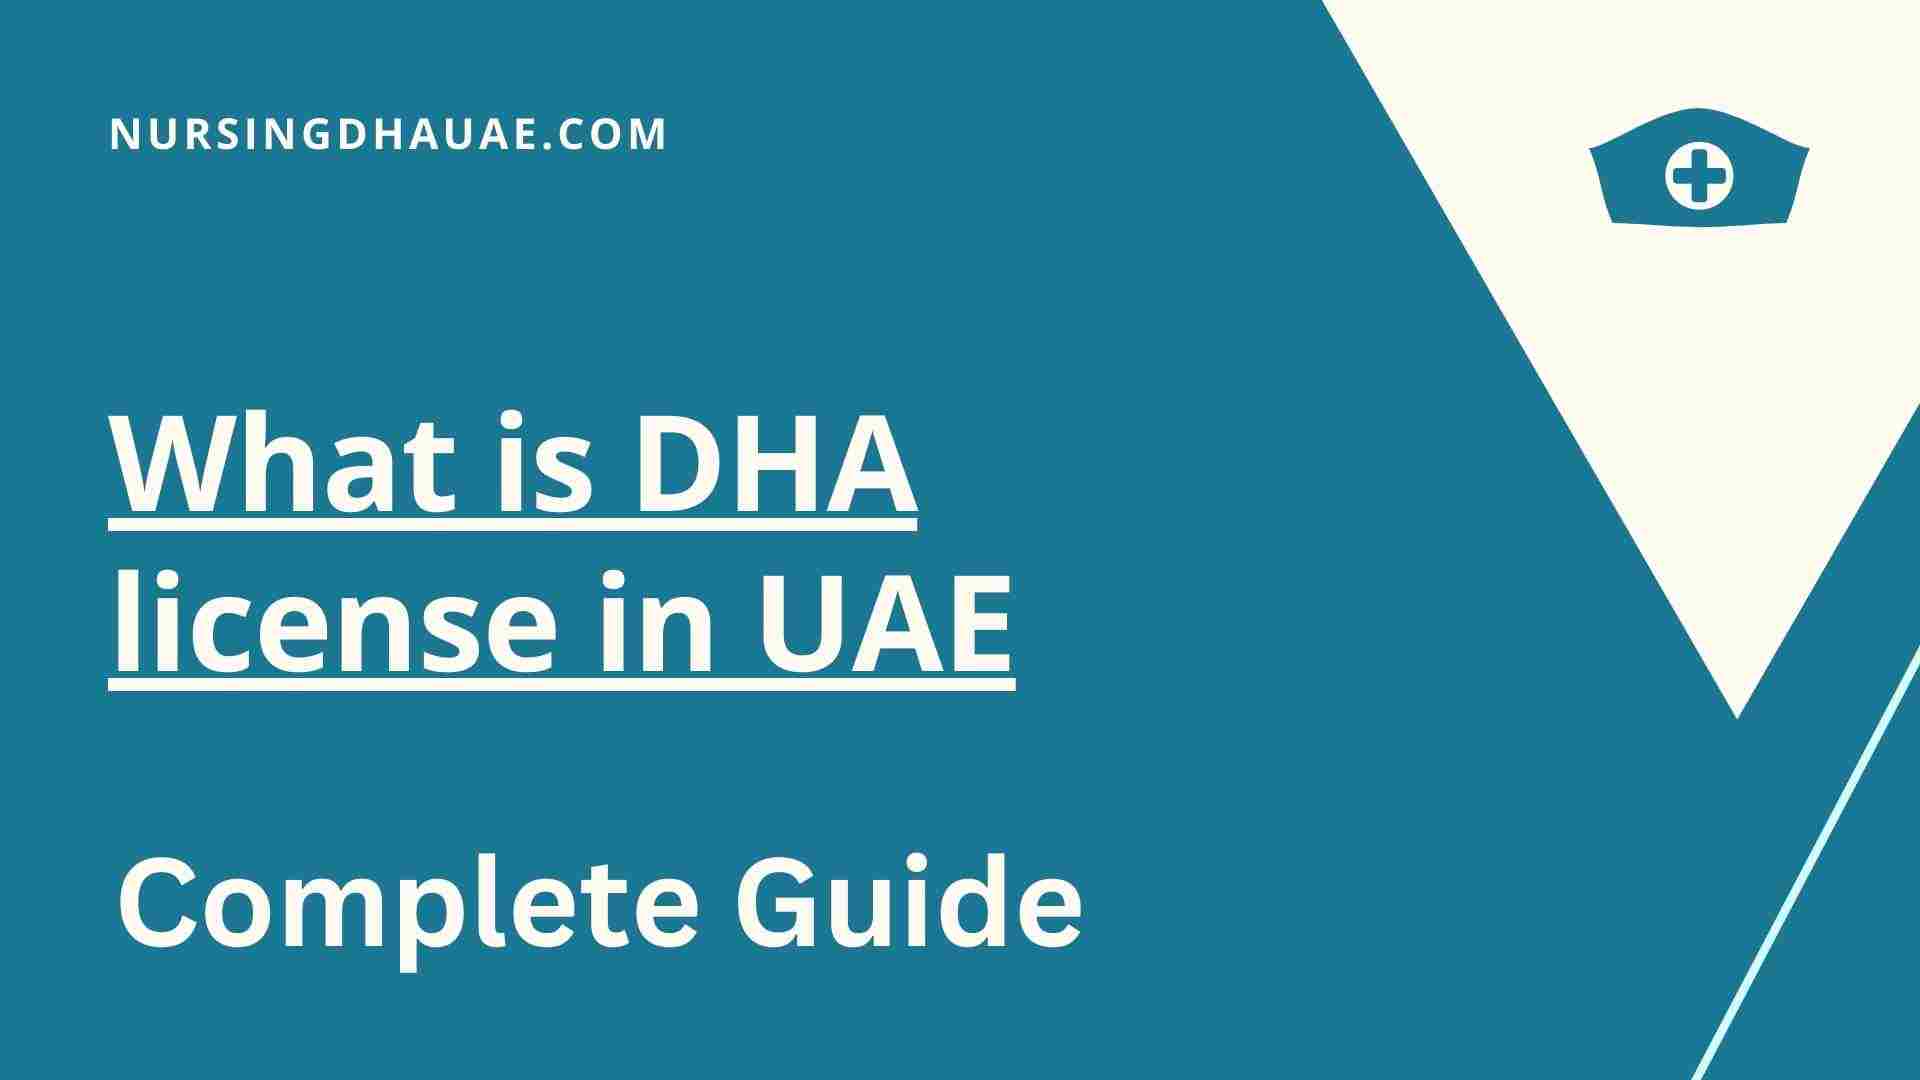 What is DHA license in UAE